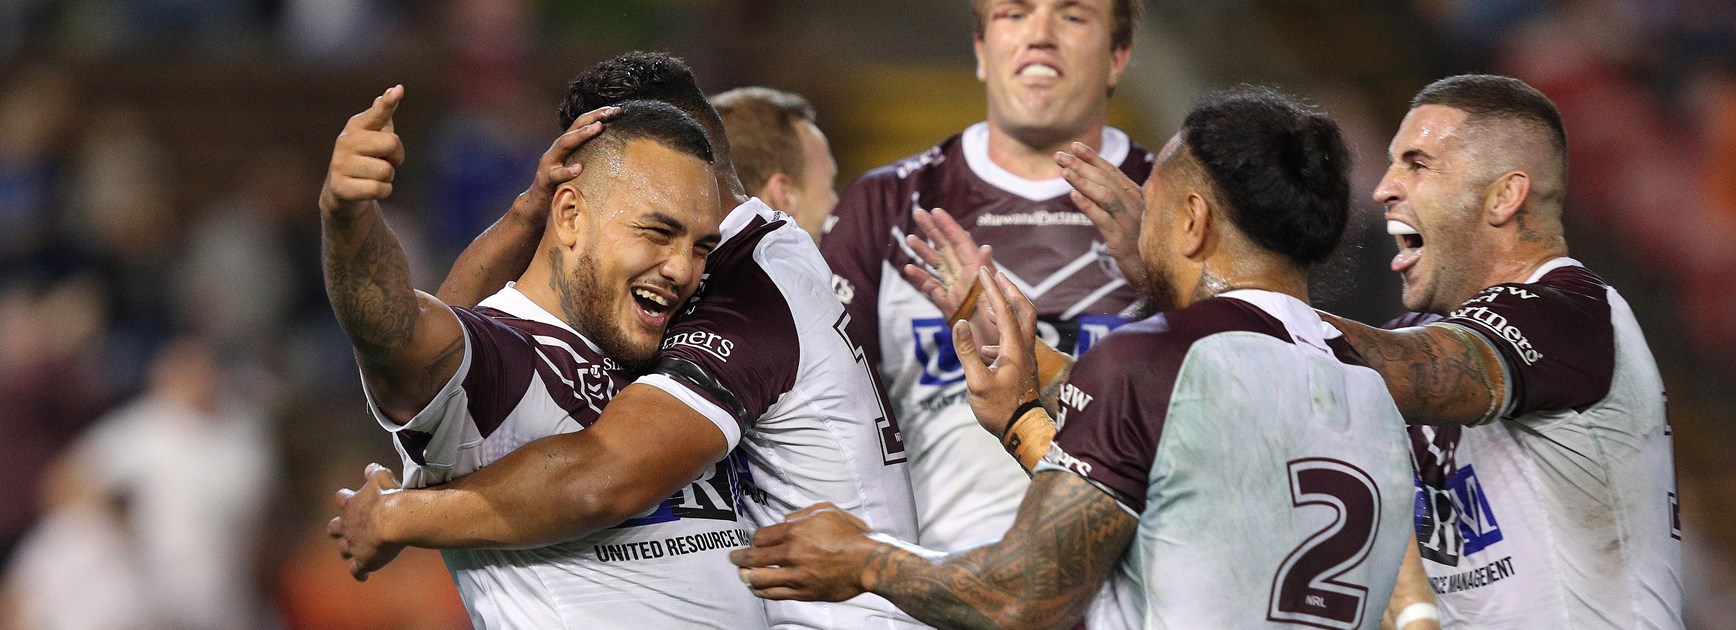 Flying start sets Manly on path to win over Knights